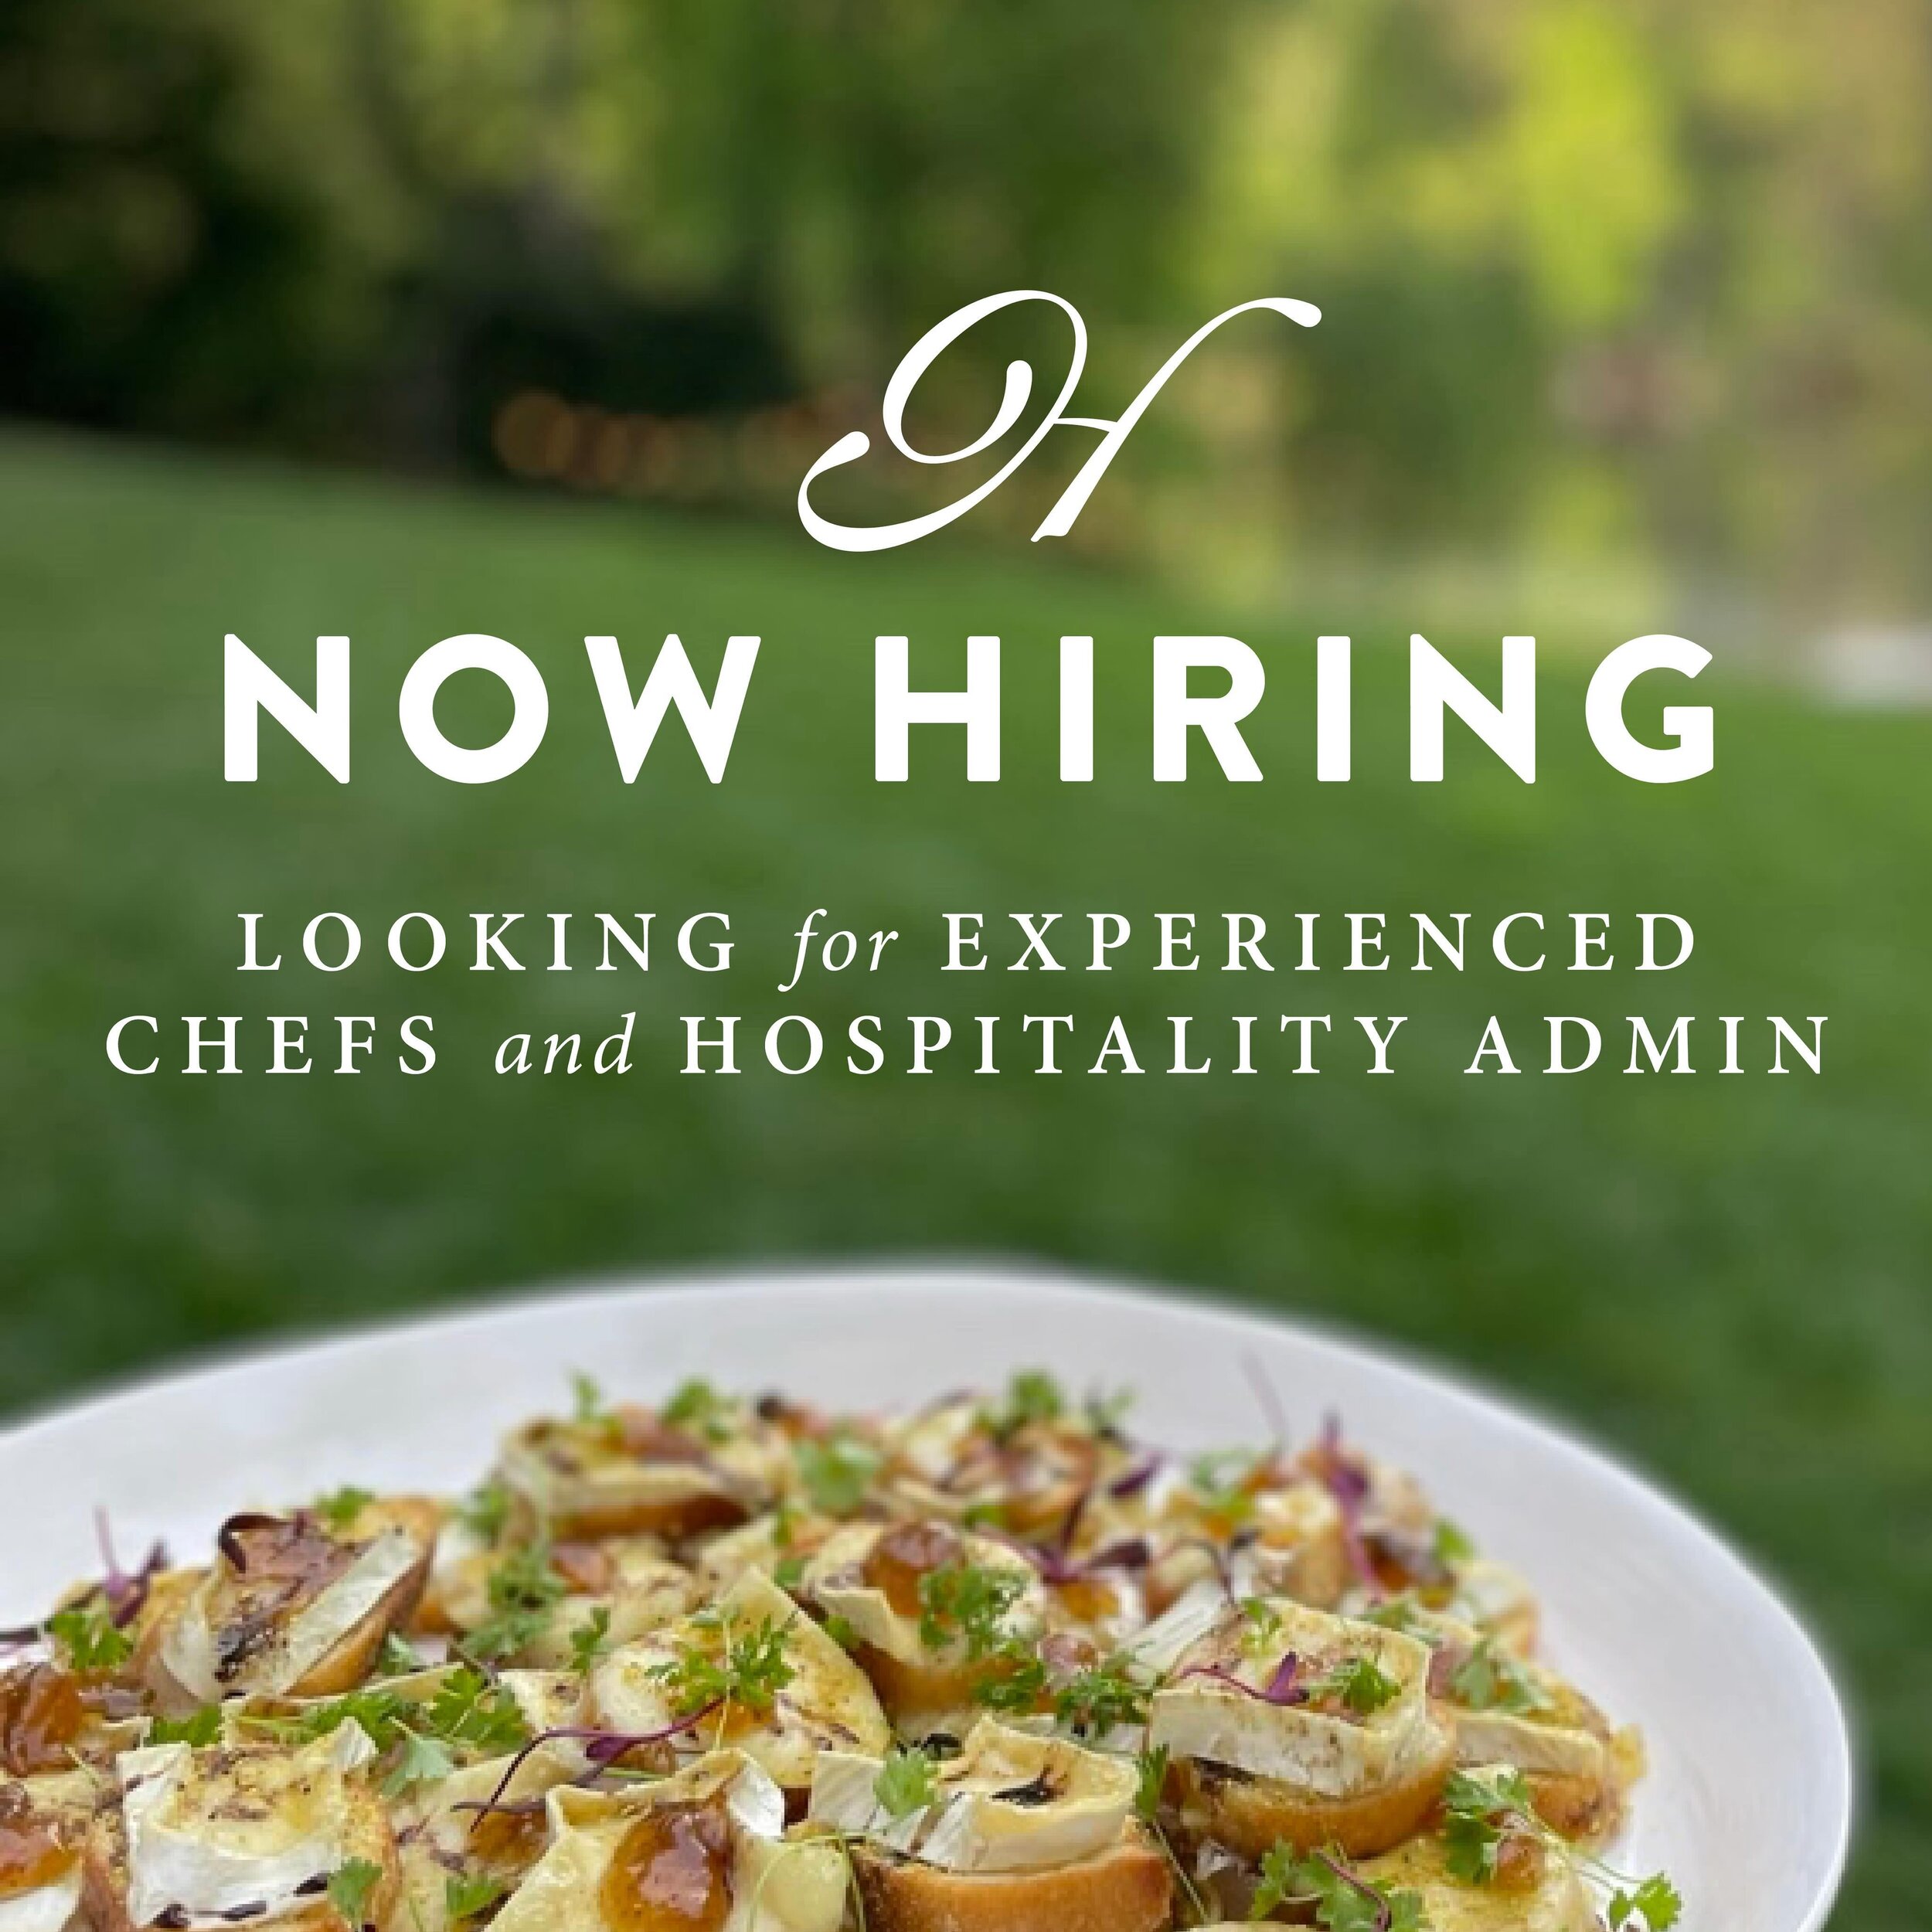 Homespun is hiring! Looking to be part of a growing team that creates exceptional culinary experiences in Metro Atlanta?! We have immediate full and part time openings on our Culinary and Hospitality teams including: Sous Chef (FT), Event Chefs (PT),